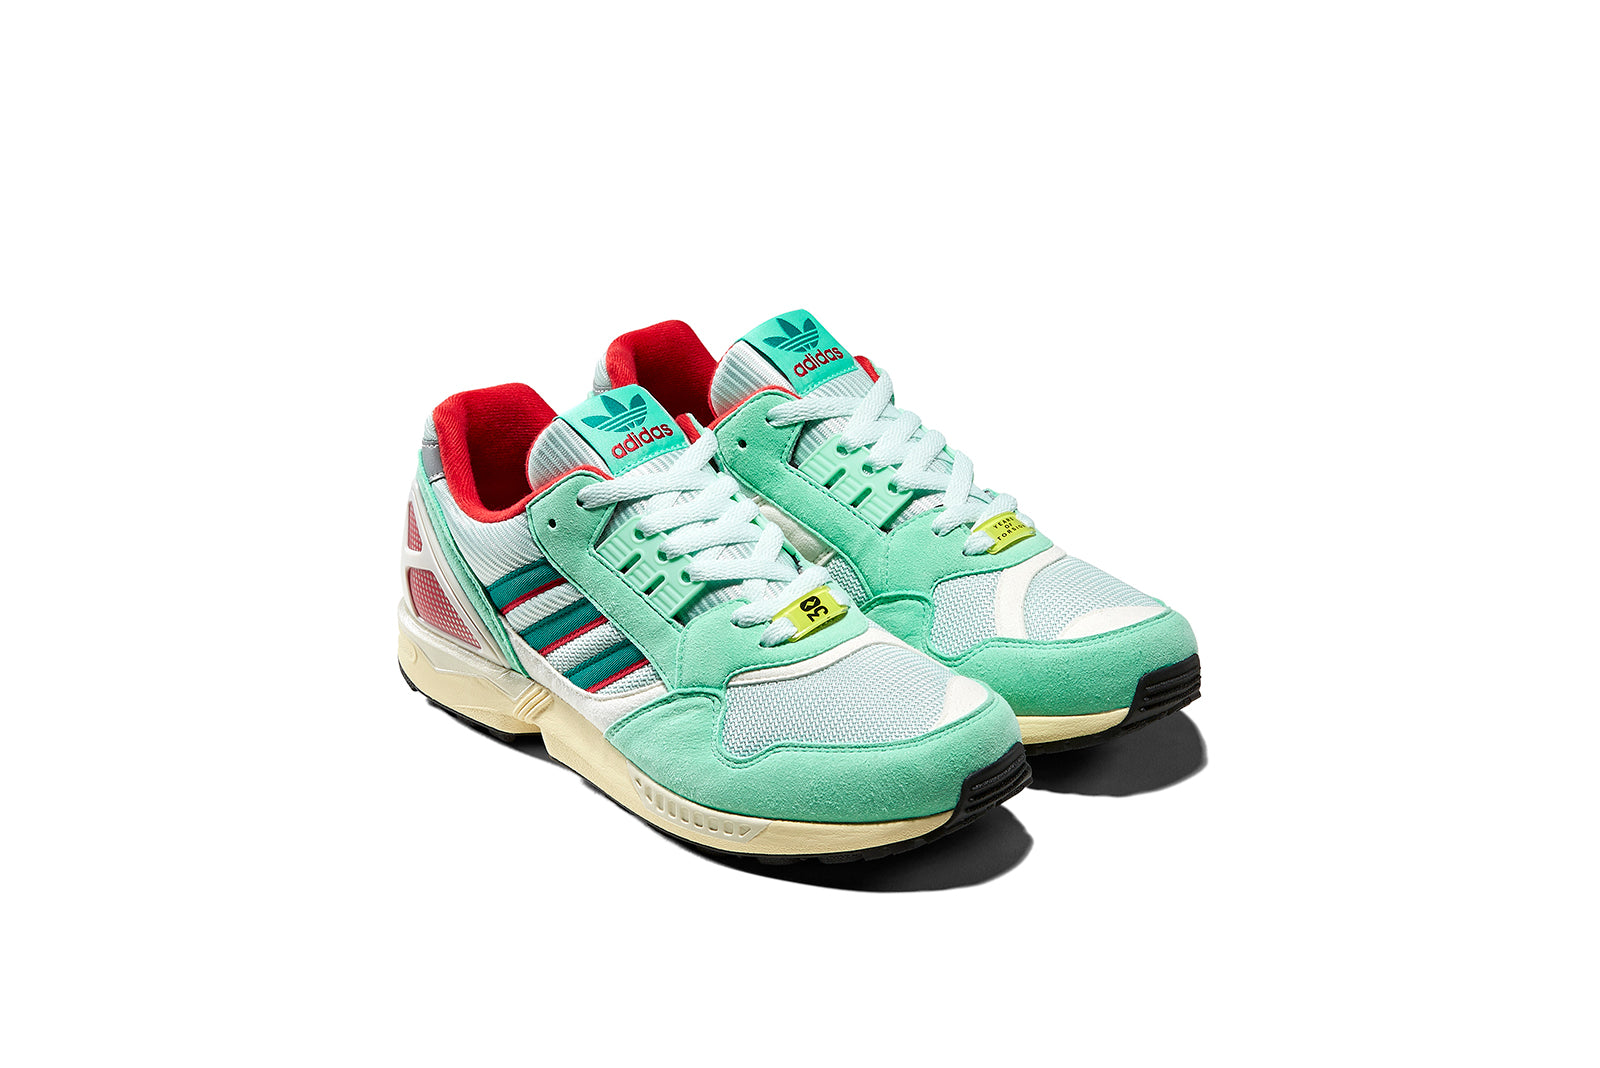 adidas zx 9000 30 years of torsion